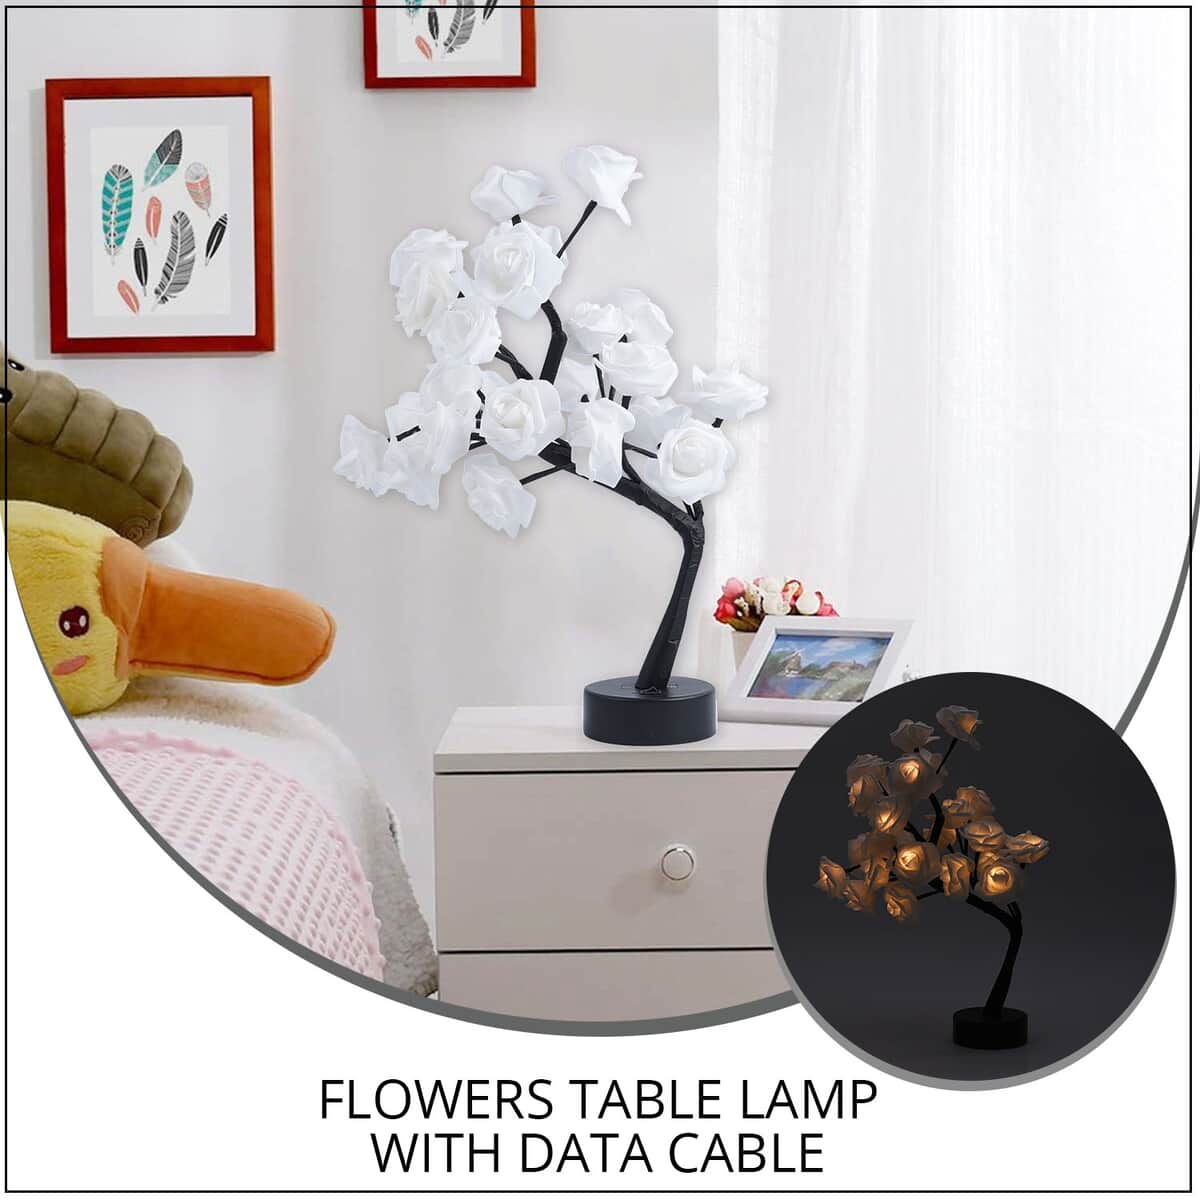 24 Lights Flowers Table Lamp with Data Cable - White (3xAAA Battery Not Included) (11.02"x9.84"x15.75") image number 1